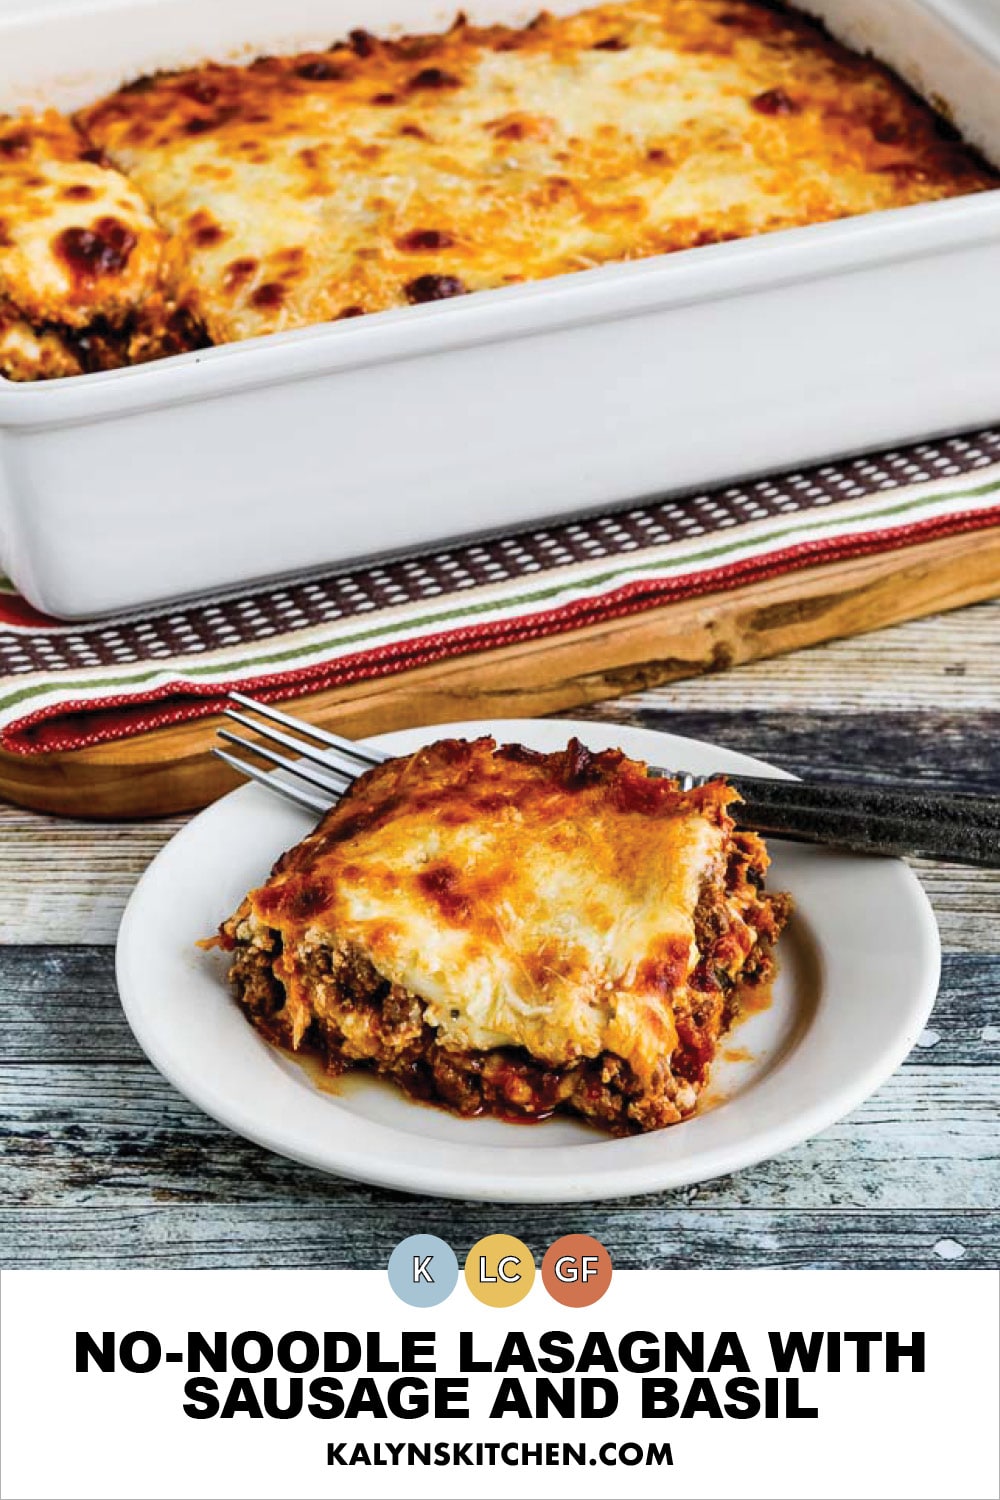 Pinterest image of No-Noodle Lasagna with Sausage and Basil